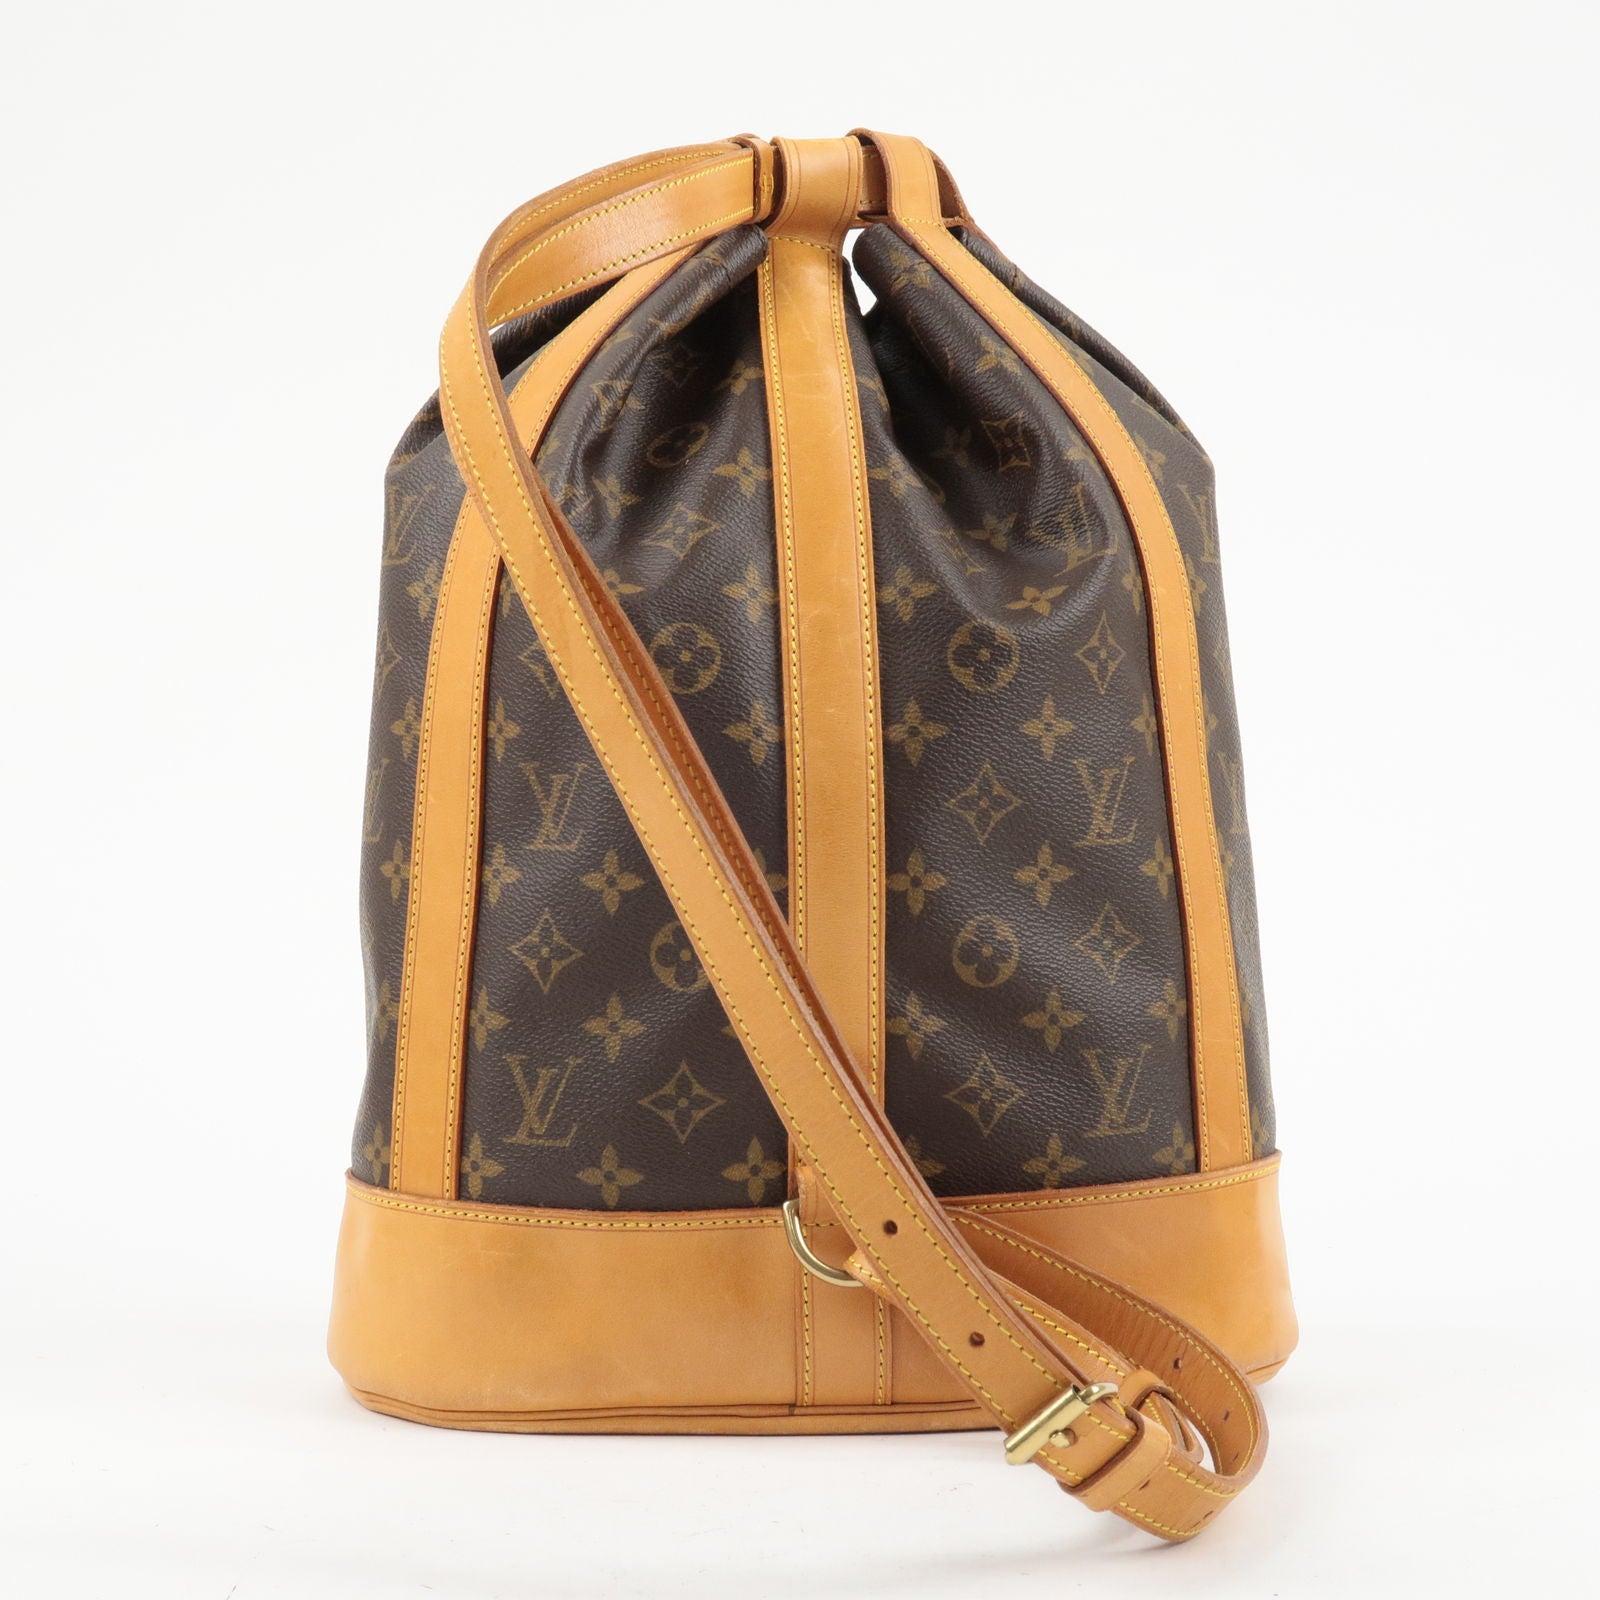 Louis Vuitton Monogram Patches Collection From Fall 2018 - Spotted